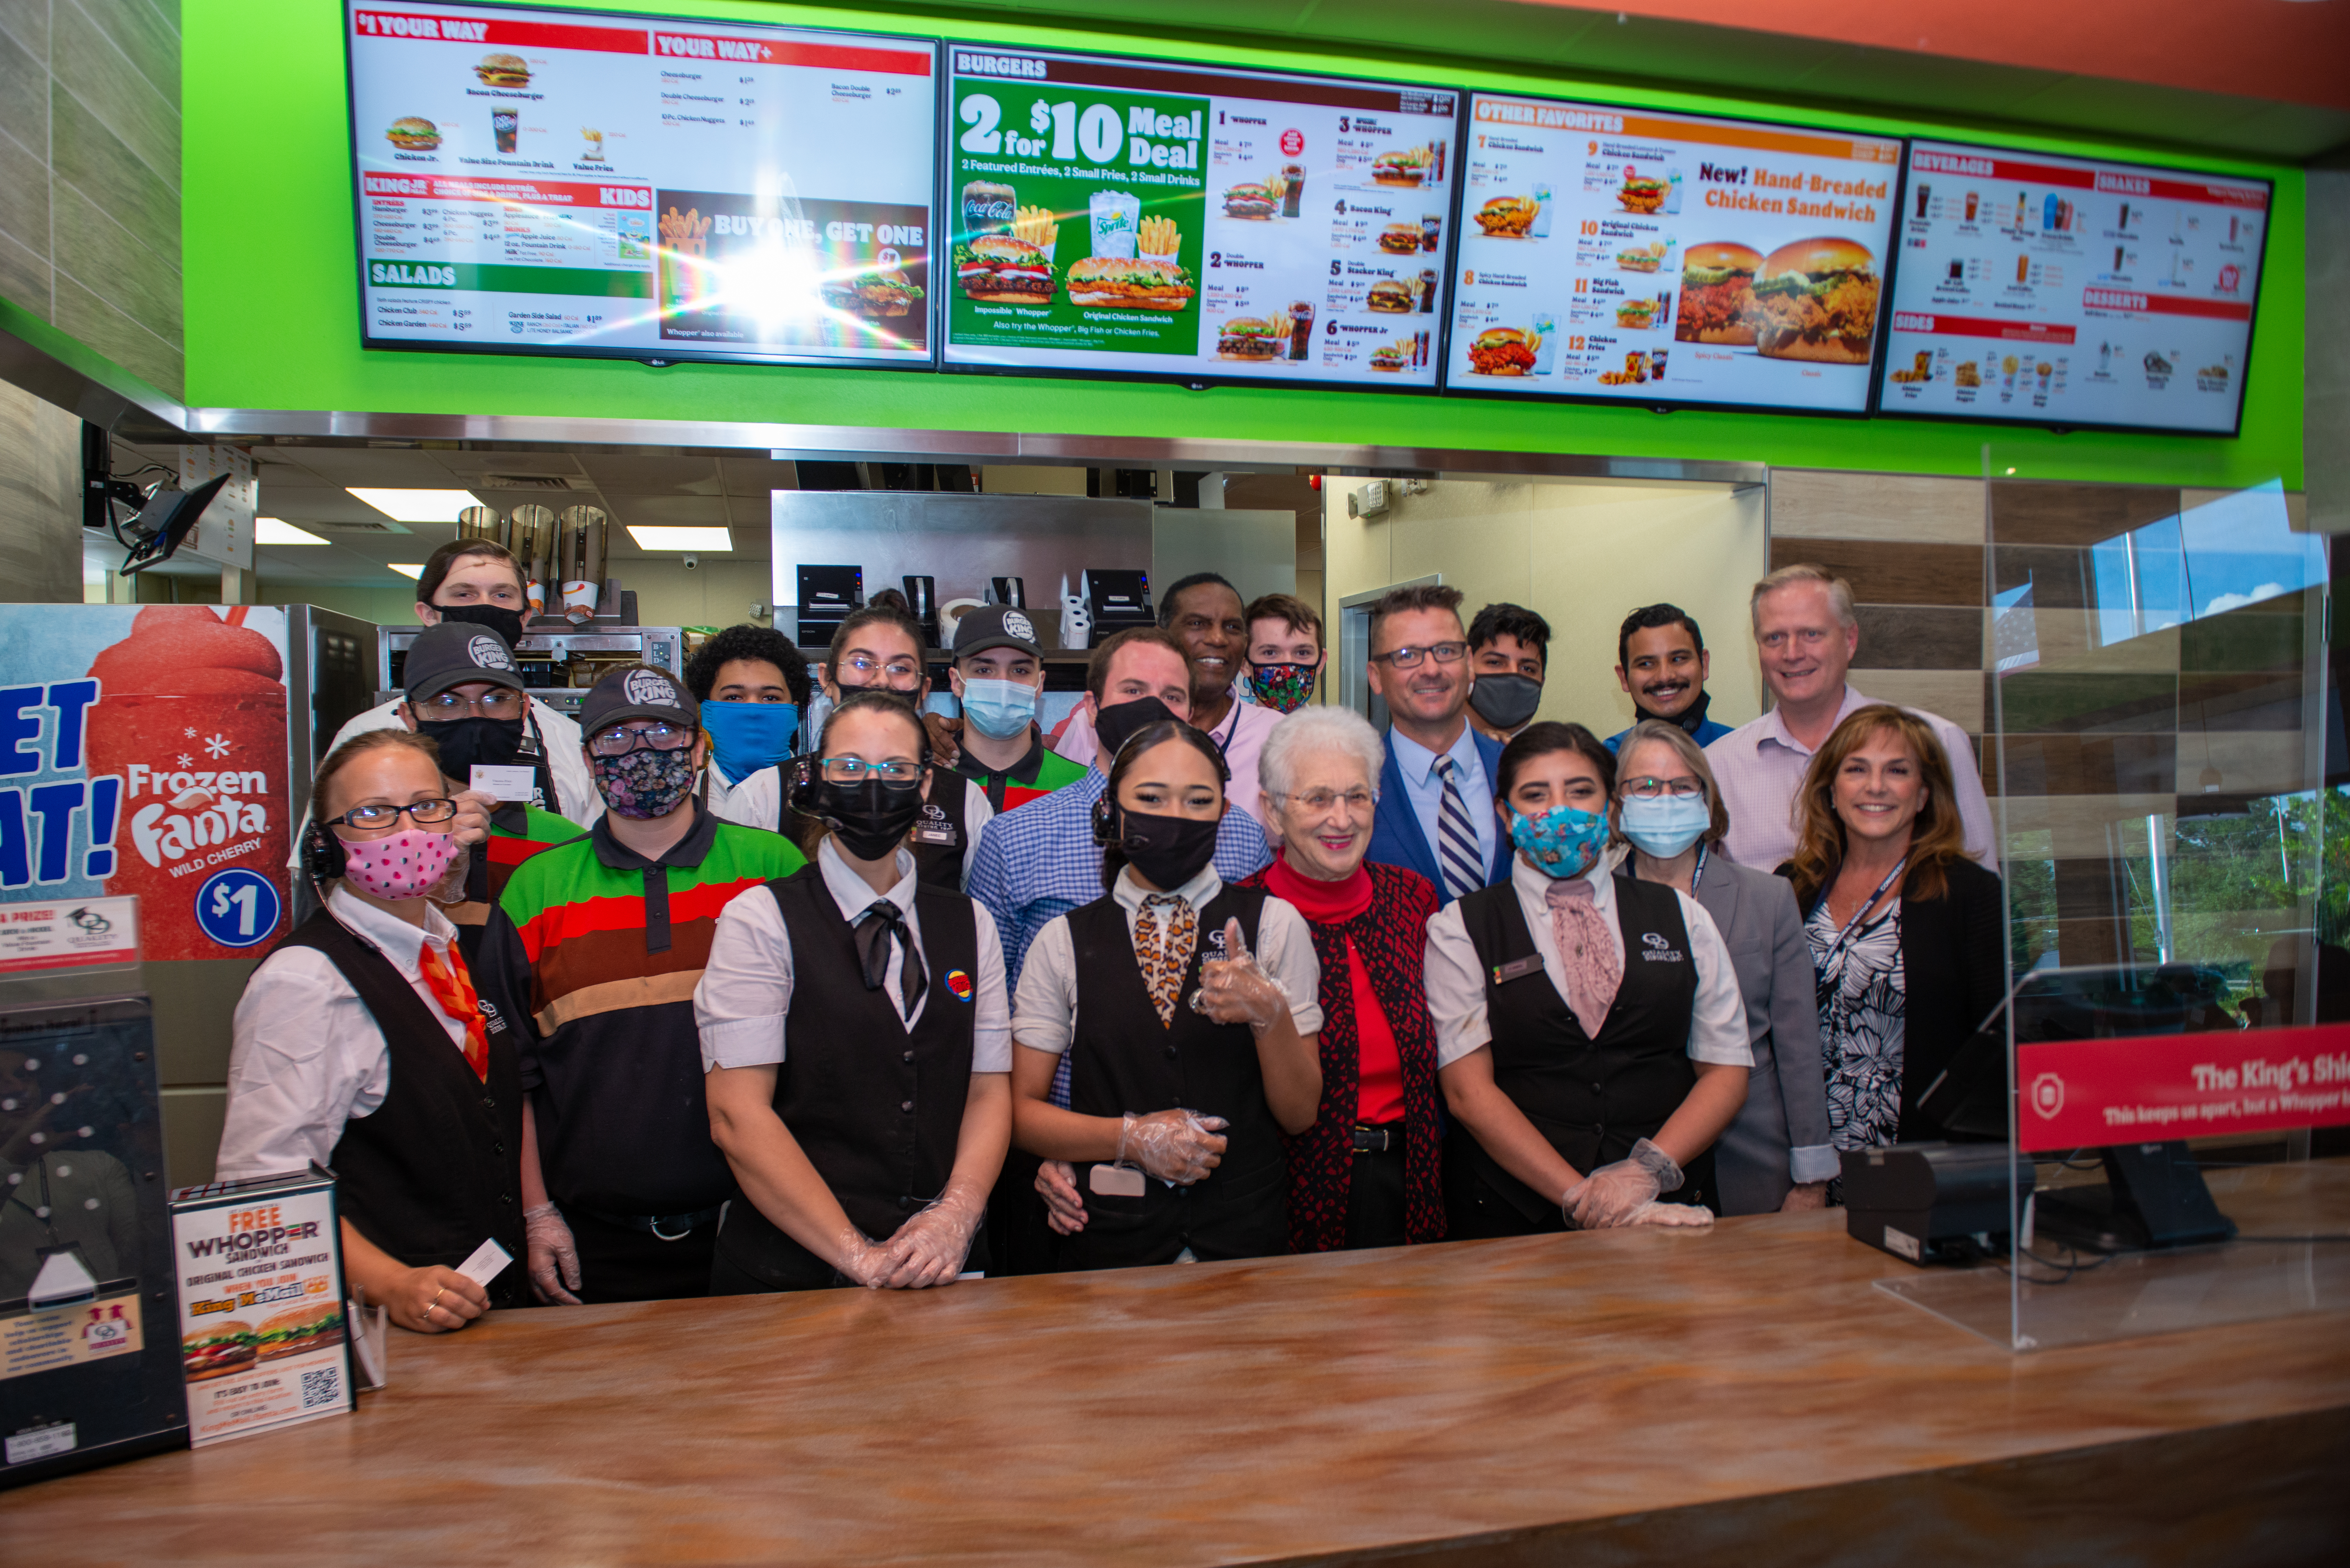 Burger King Franchisee Hosts Members of the House Education and Labor Committee at Restaurant